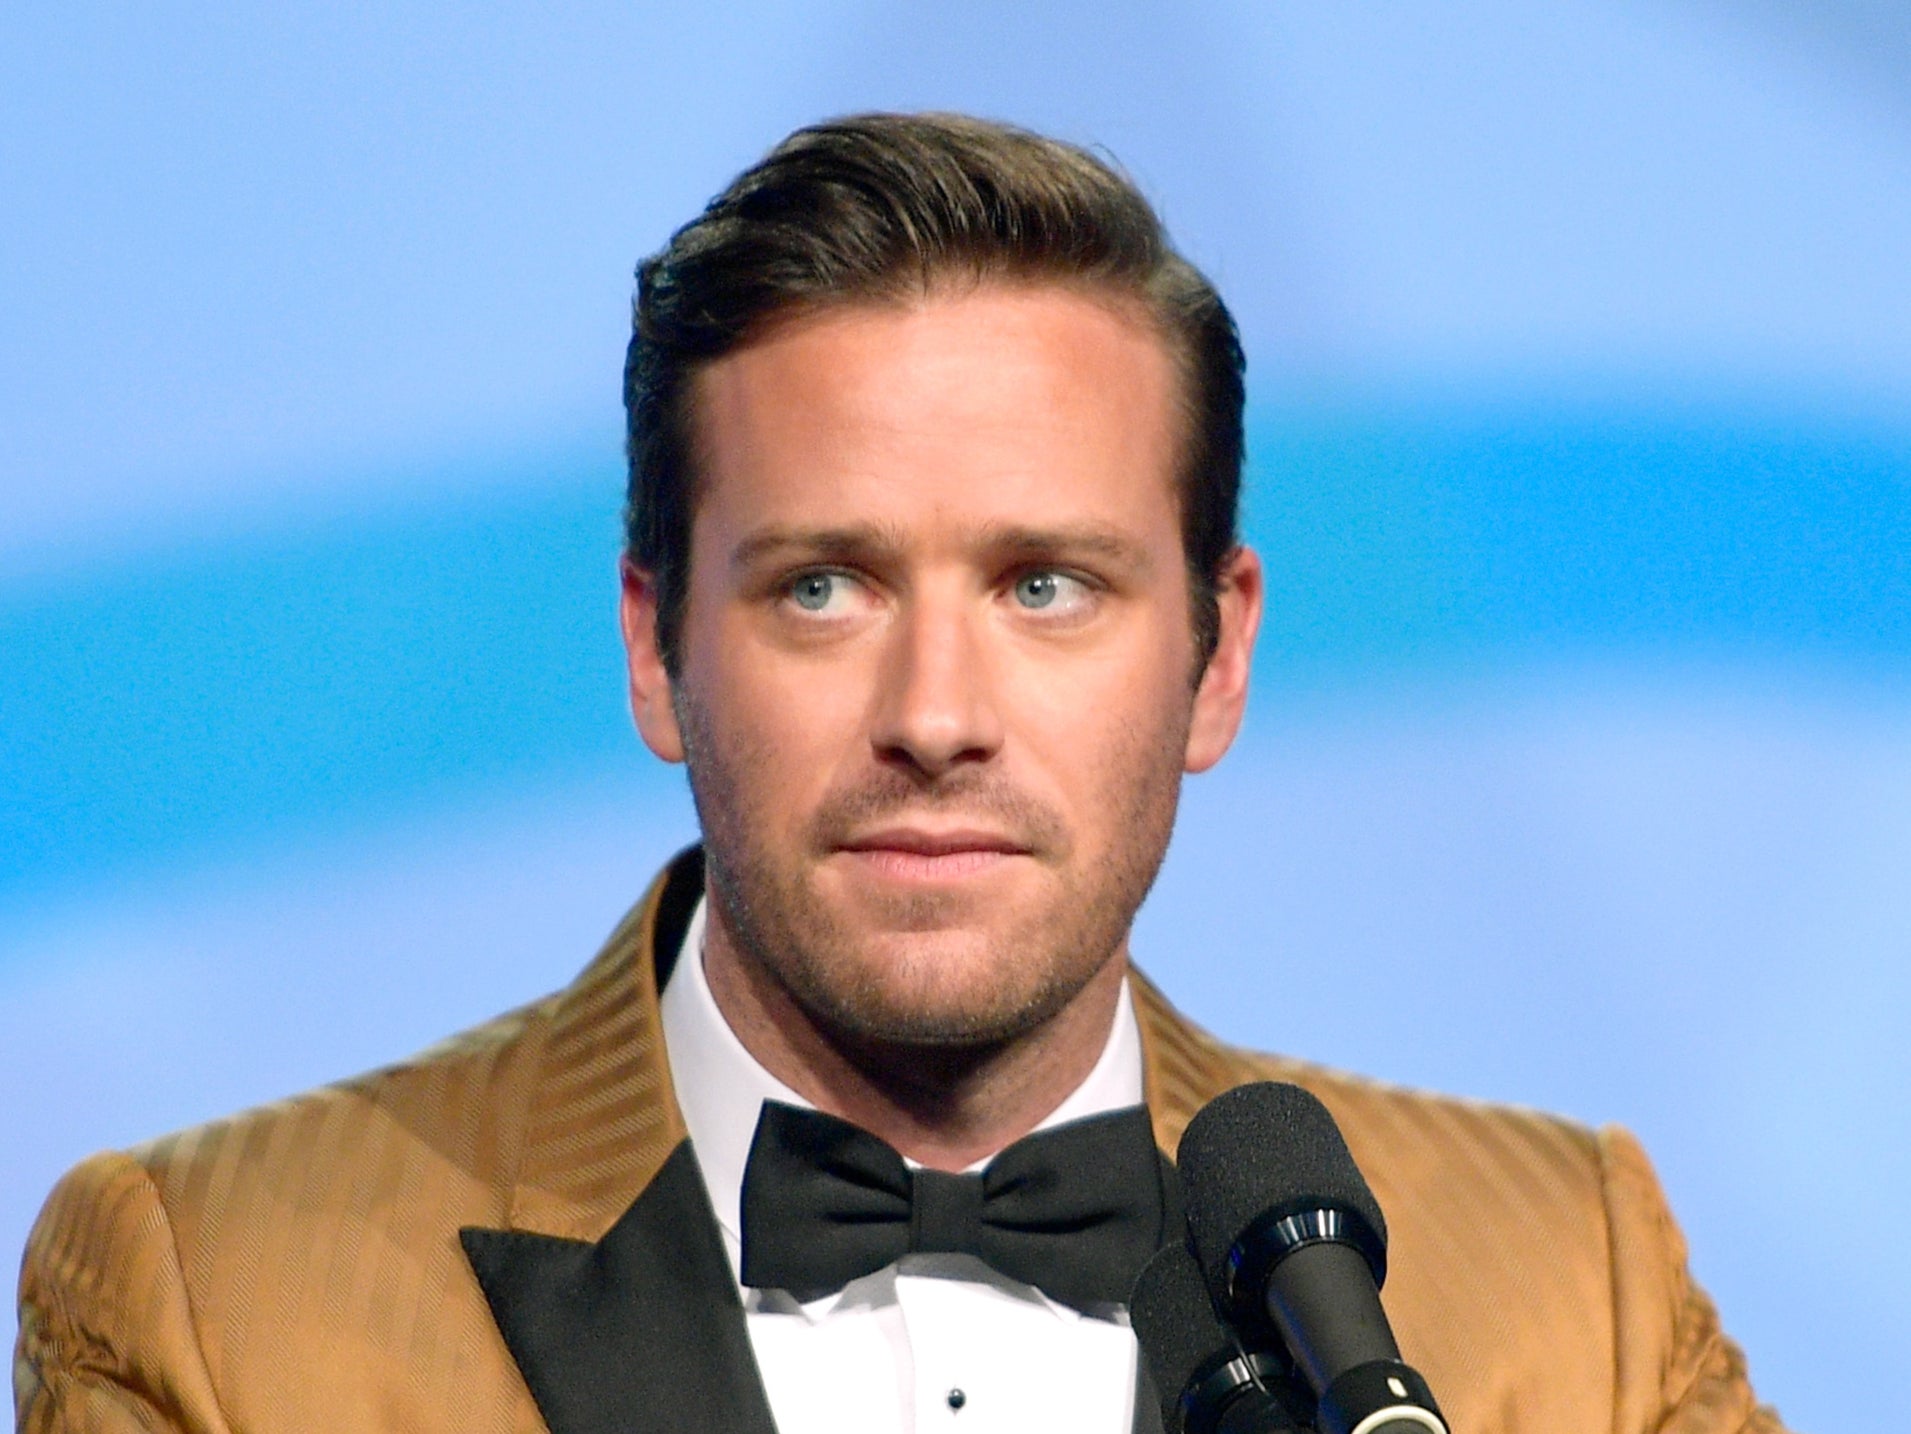 armie hammer, cannibalism, cannibal, armie hammer breaks silence on cannibal allegations after three years